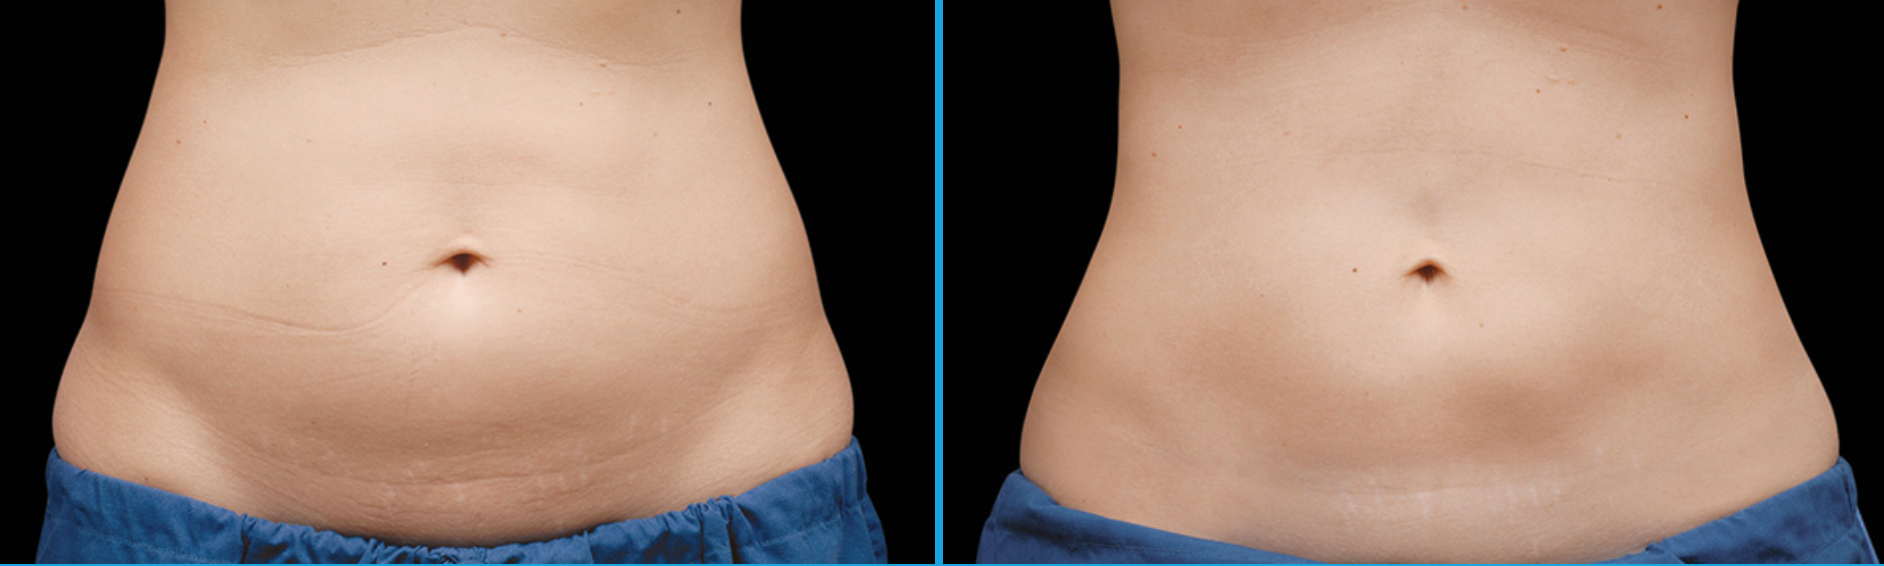 Coolsculpting Abdomen Before and After in Santa Monica